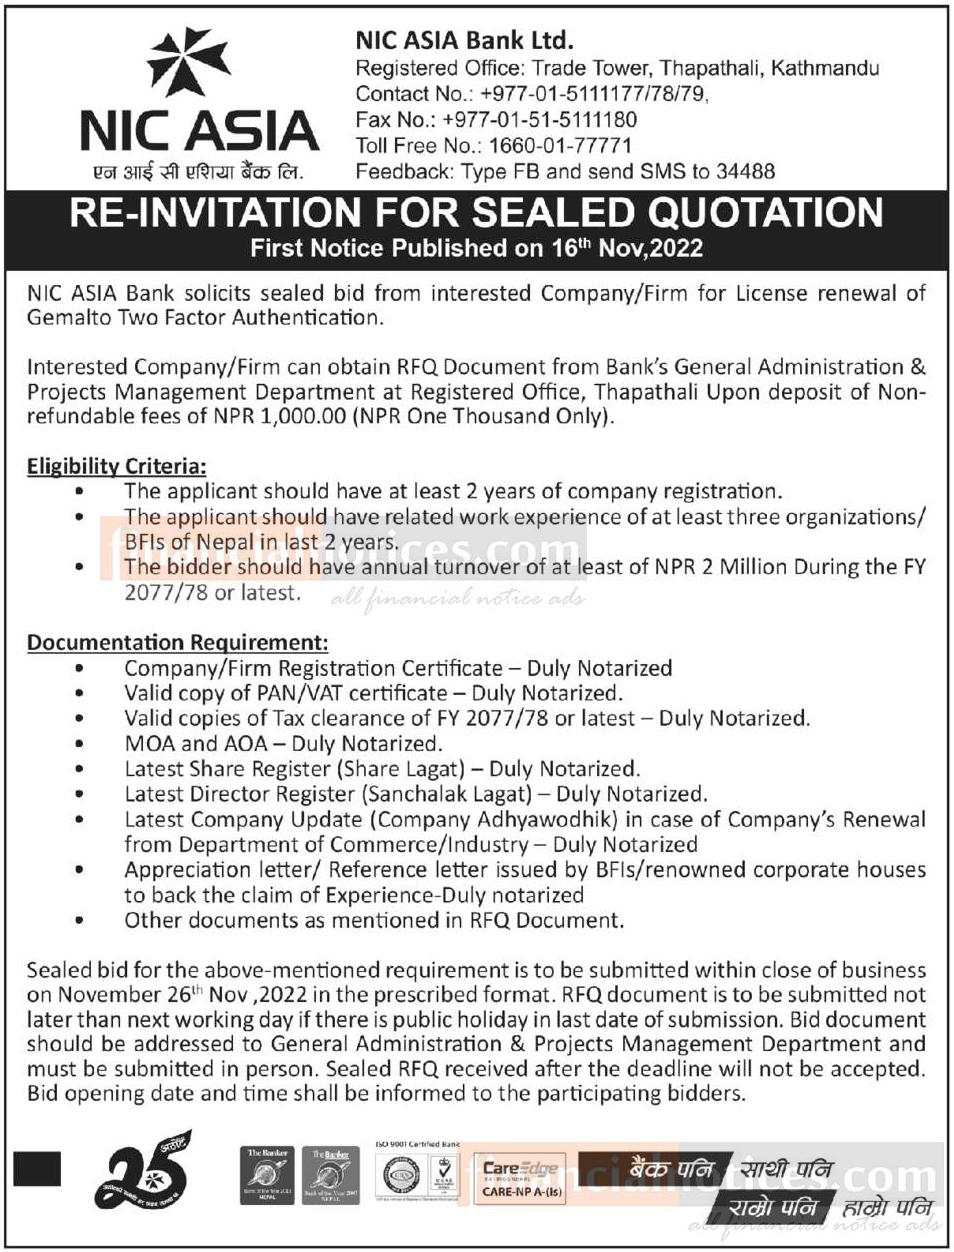 Re-Invitation for Sealed Quotation